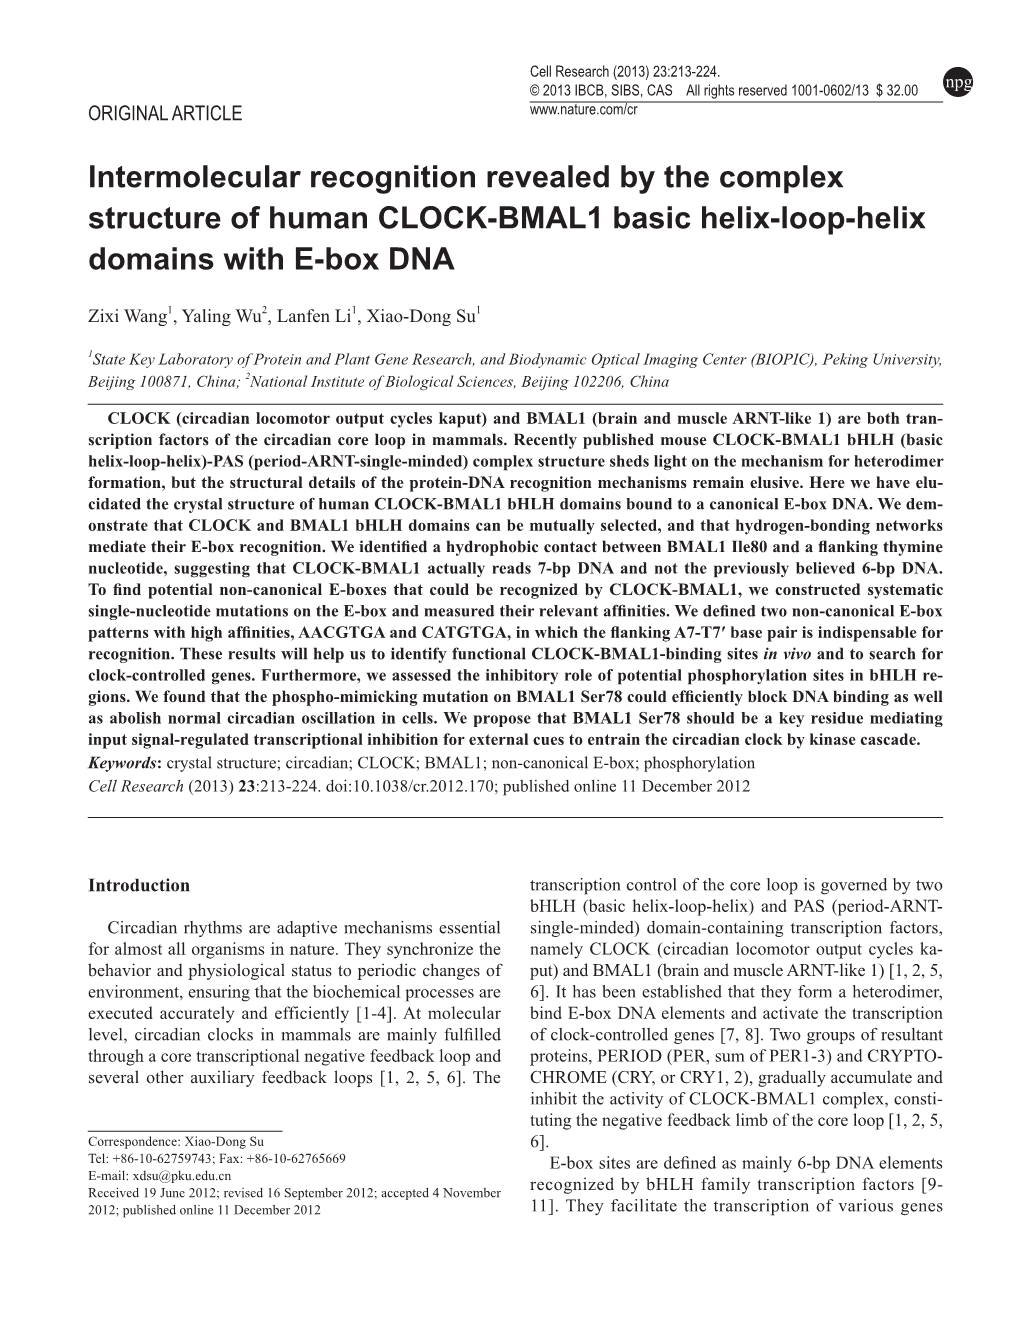 Intermolecular Recognition Revealed by the Complex Structure of Human CLOCK-BMAL1 Basic Helix-Loop-Helix Domains with E-Box DNA